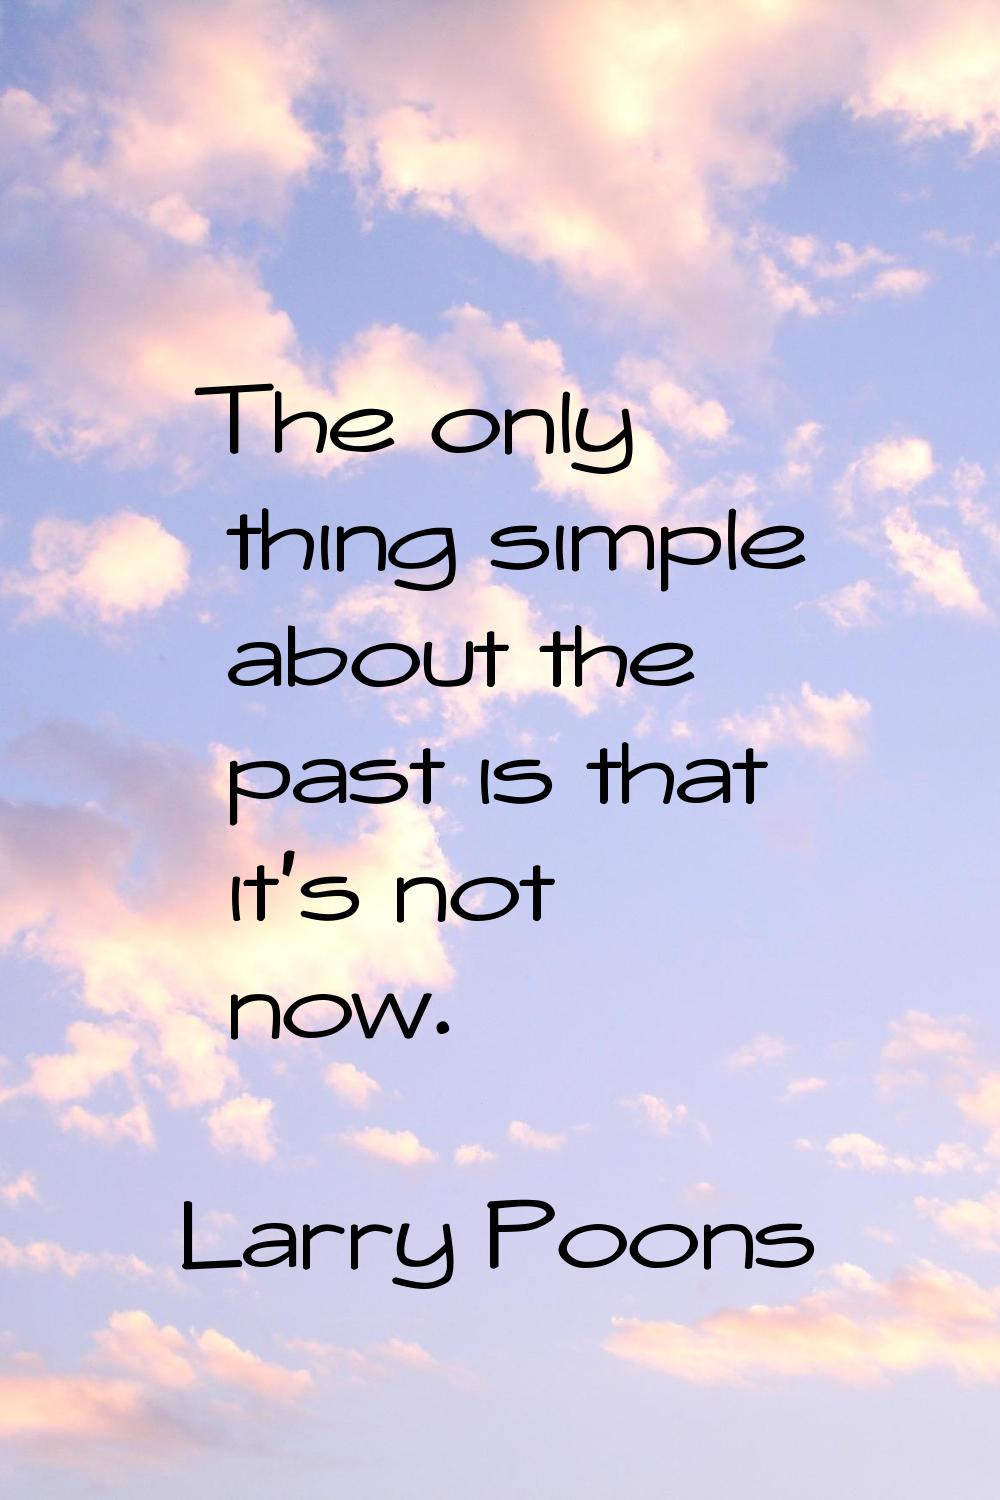 The only thing simple about the past is that it's not now.